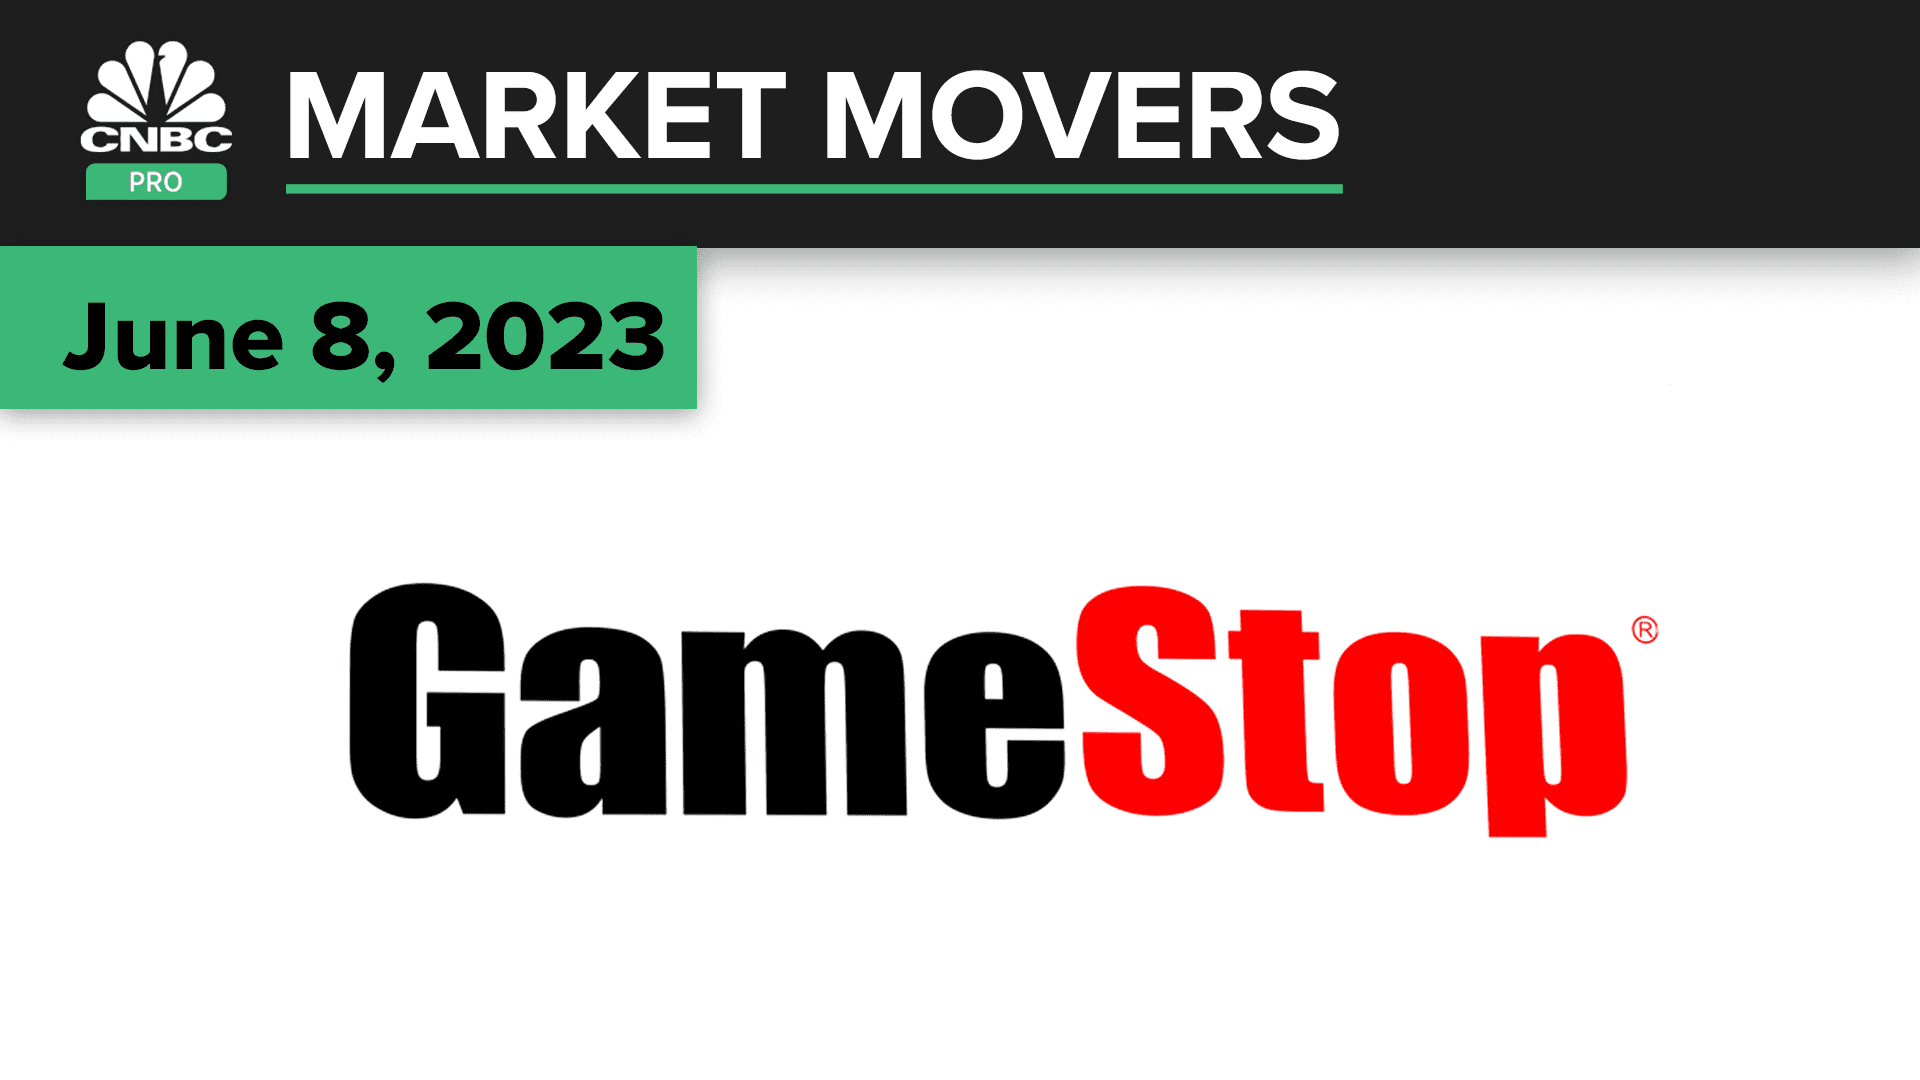 GameStop stock plummets after CEO is fired. Here's what the pros say